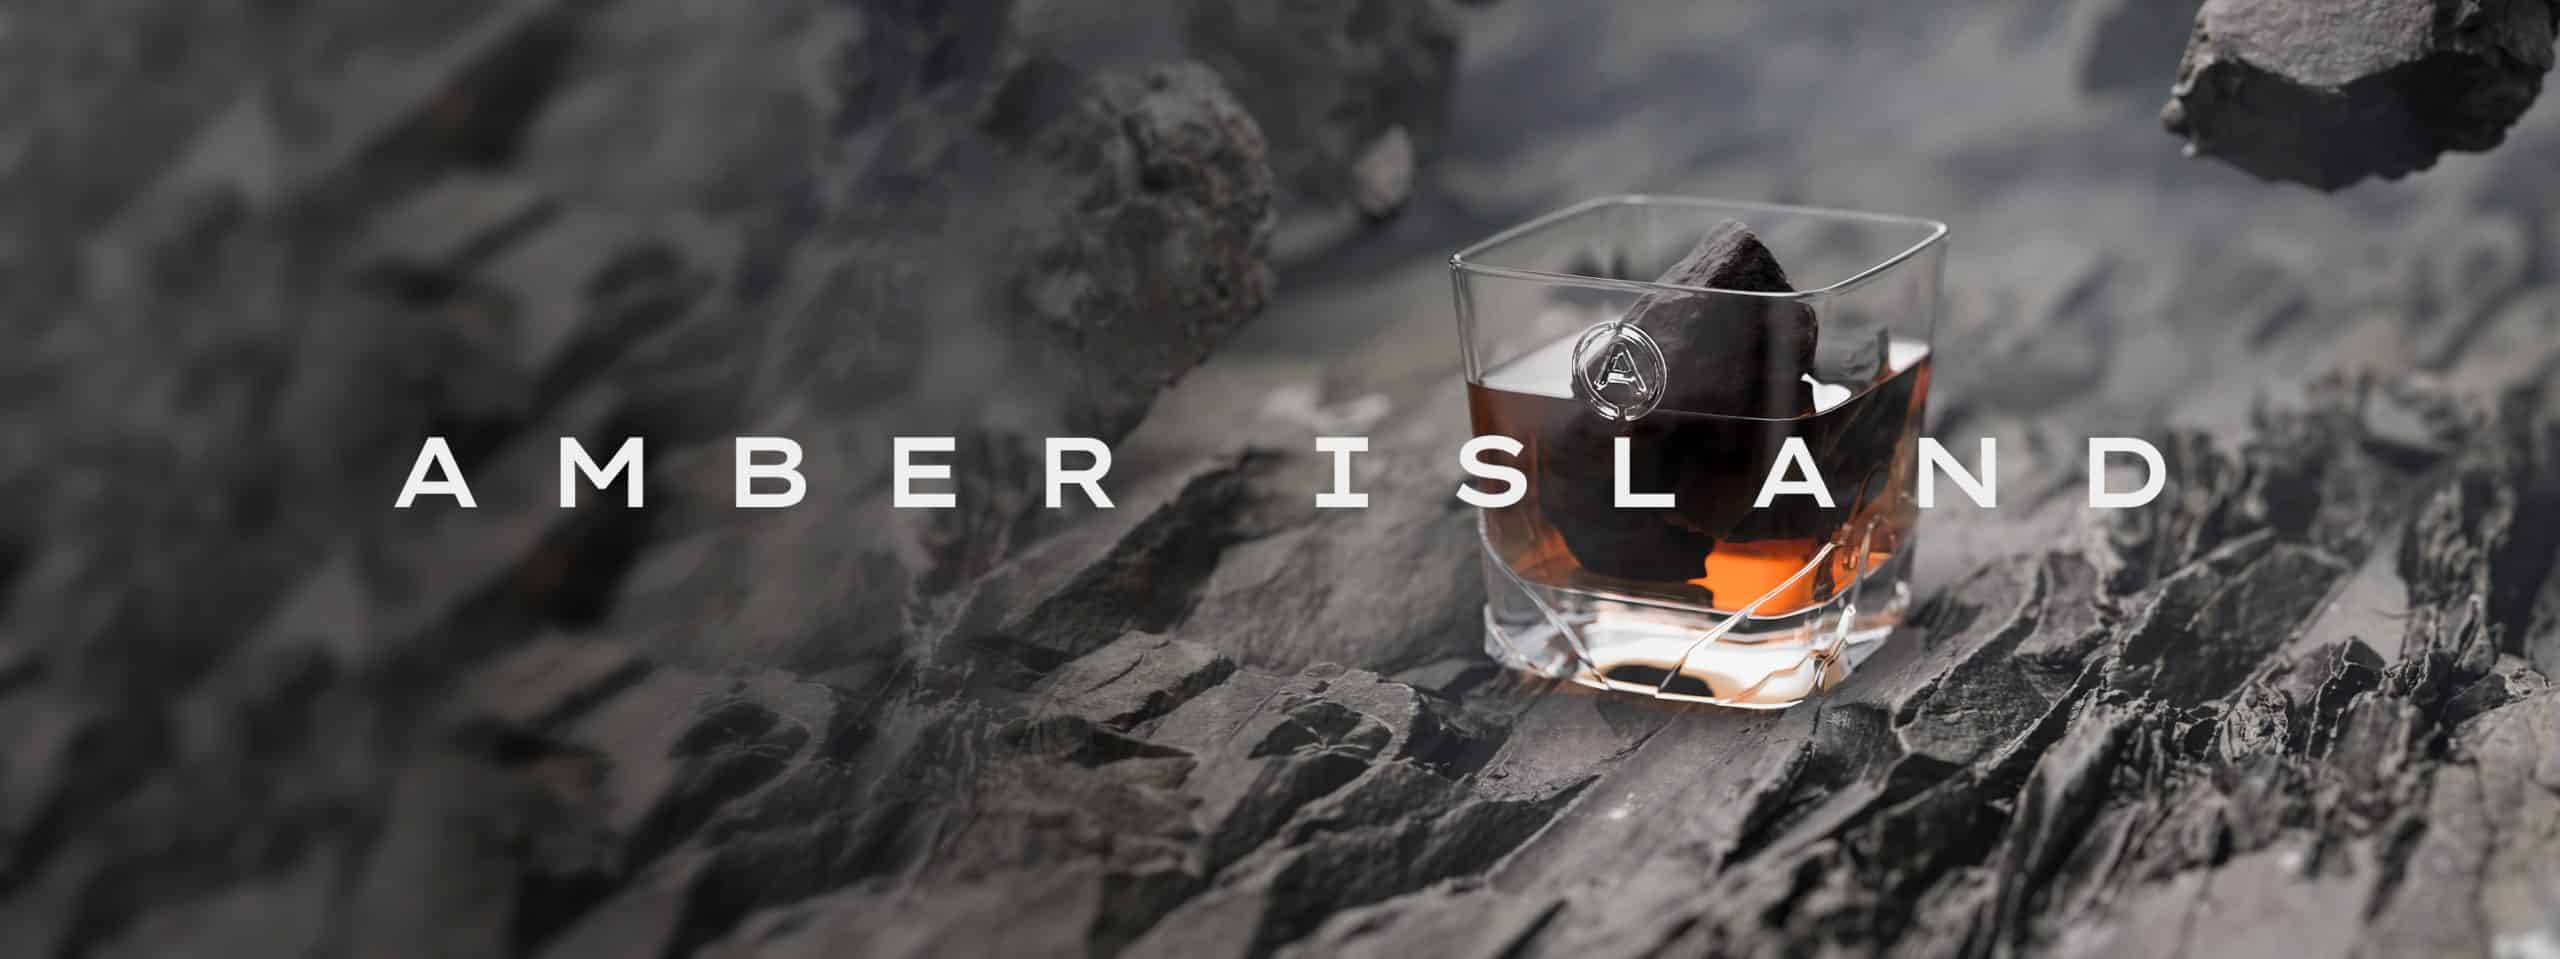 Image of Amber Island text and whisky in glasss